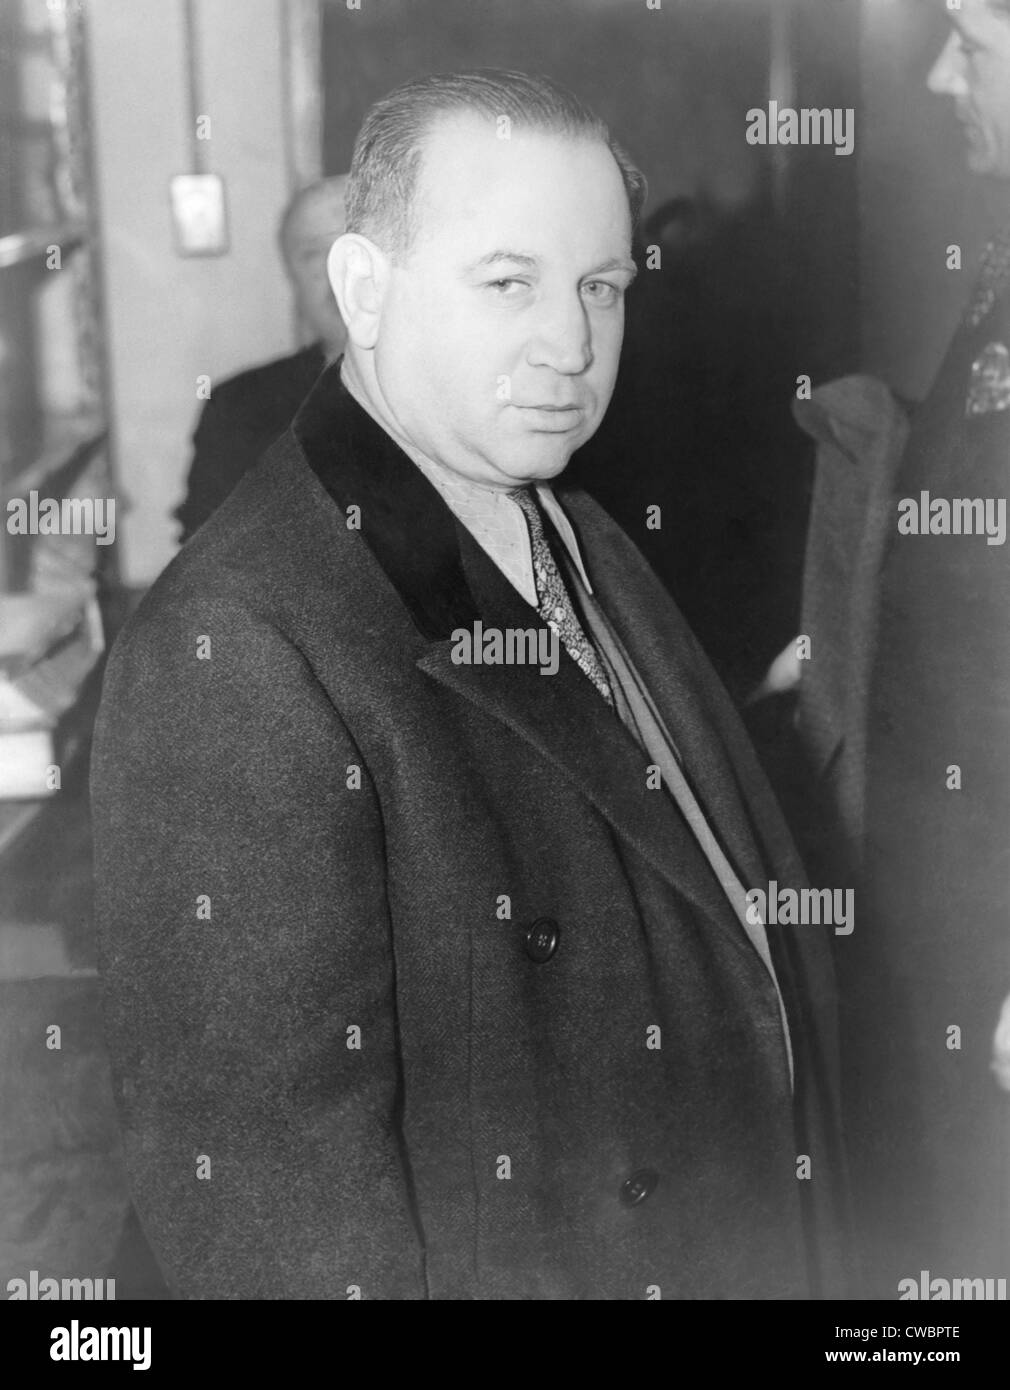 Jacob 'Gurrah' Shapiro (1899-1947), in 1936, the year he was convicted of the Sherman Anti-Trust Act violations and sentenced Stock Photo